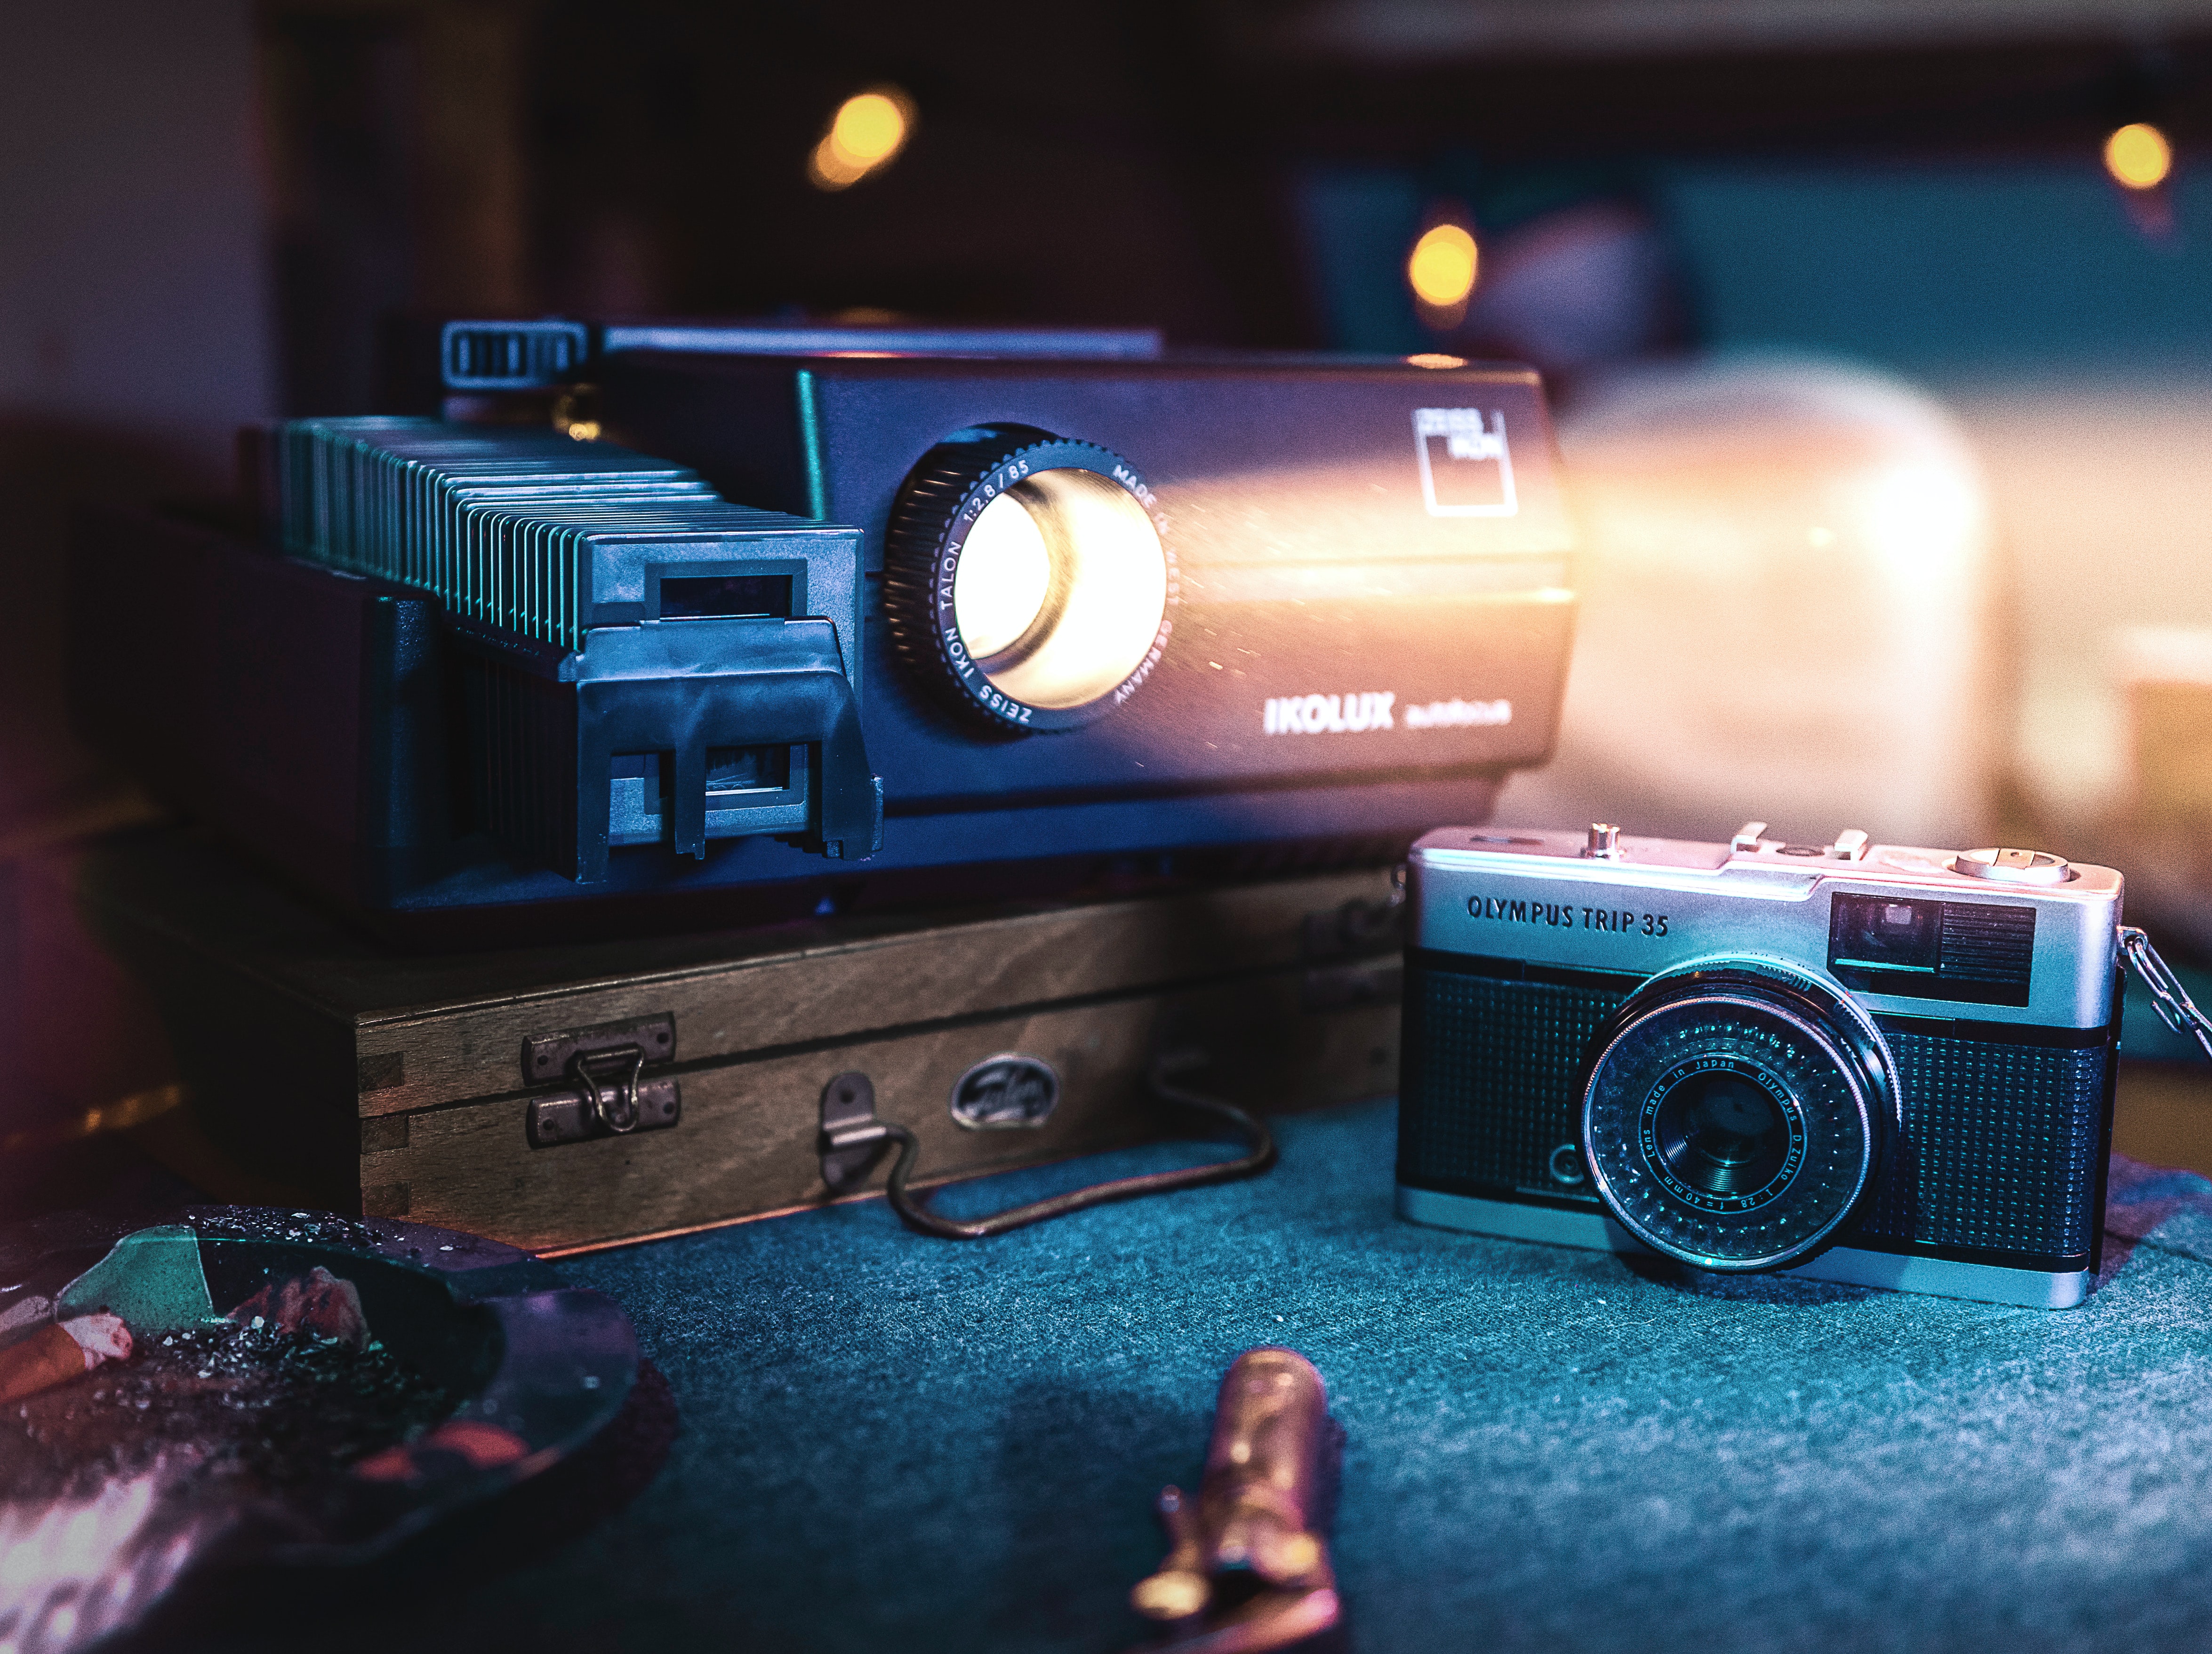 A Slide projector and 35mm film camera, Photo by Berend van Rossum on Unsplash